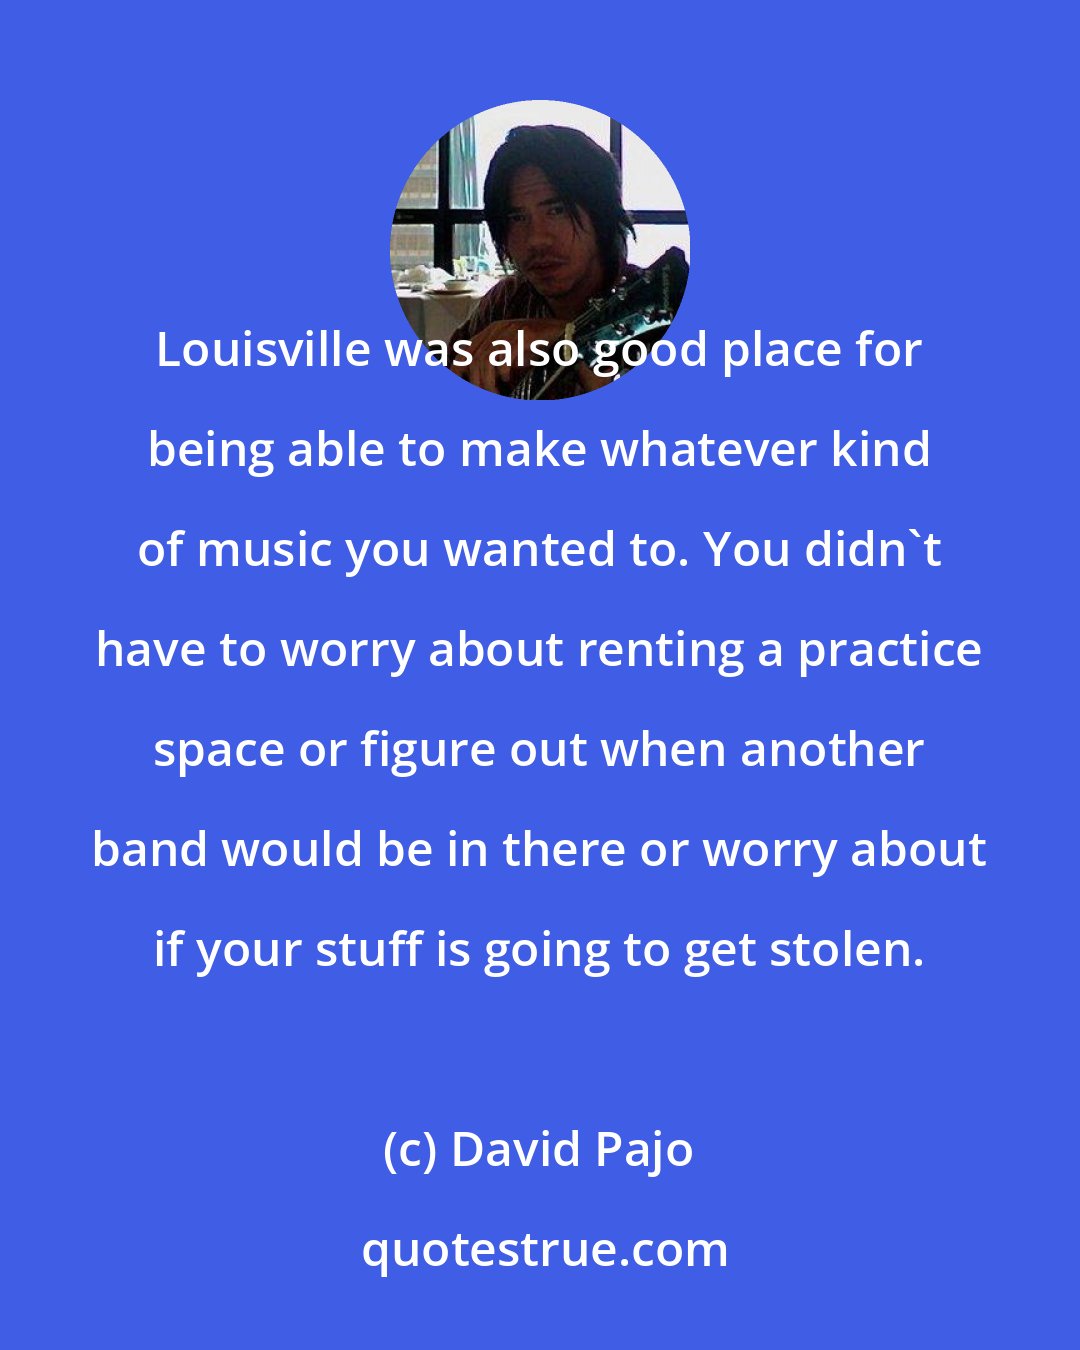 David Pajo: Louisville was also good place for being able to make whatever kind of music you wanted to. You didn't have to worry about renting a practice space or figure out when another band would be in there or worry about if your stuff is going to get stolen.